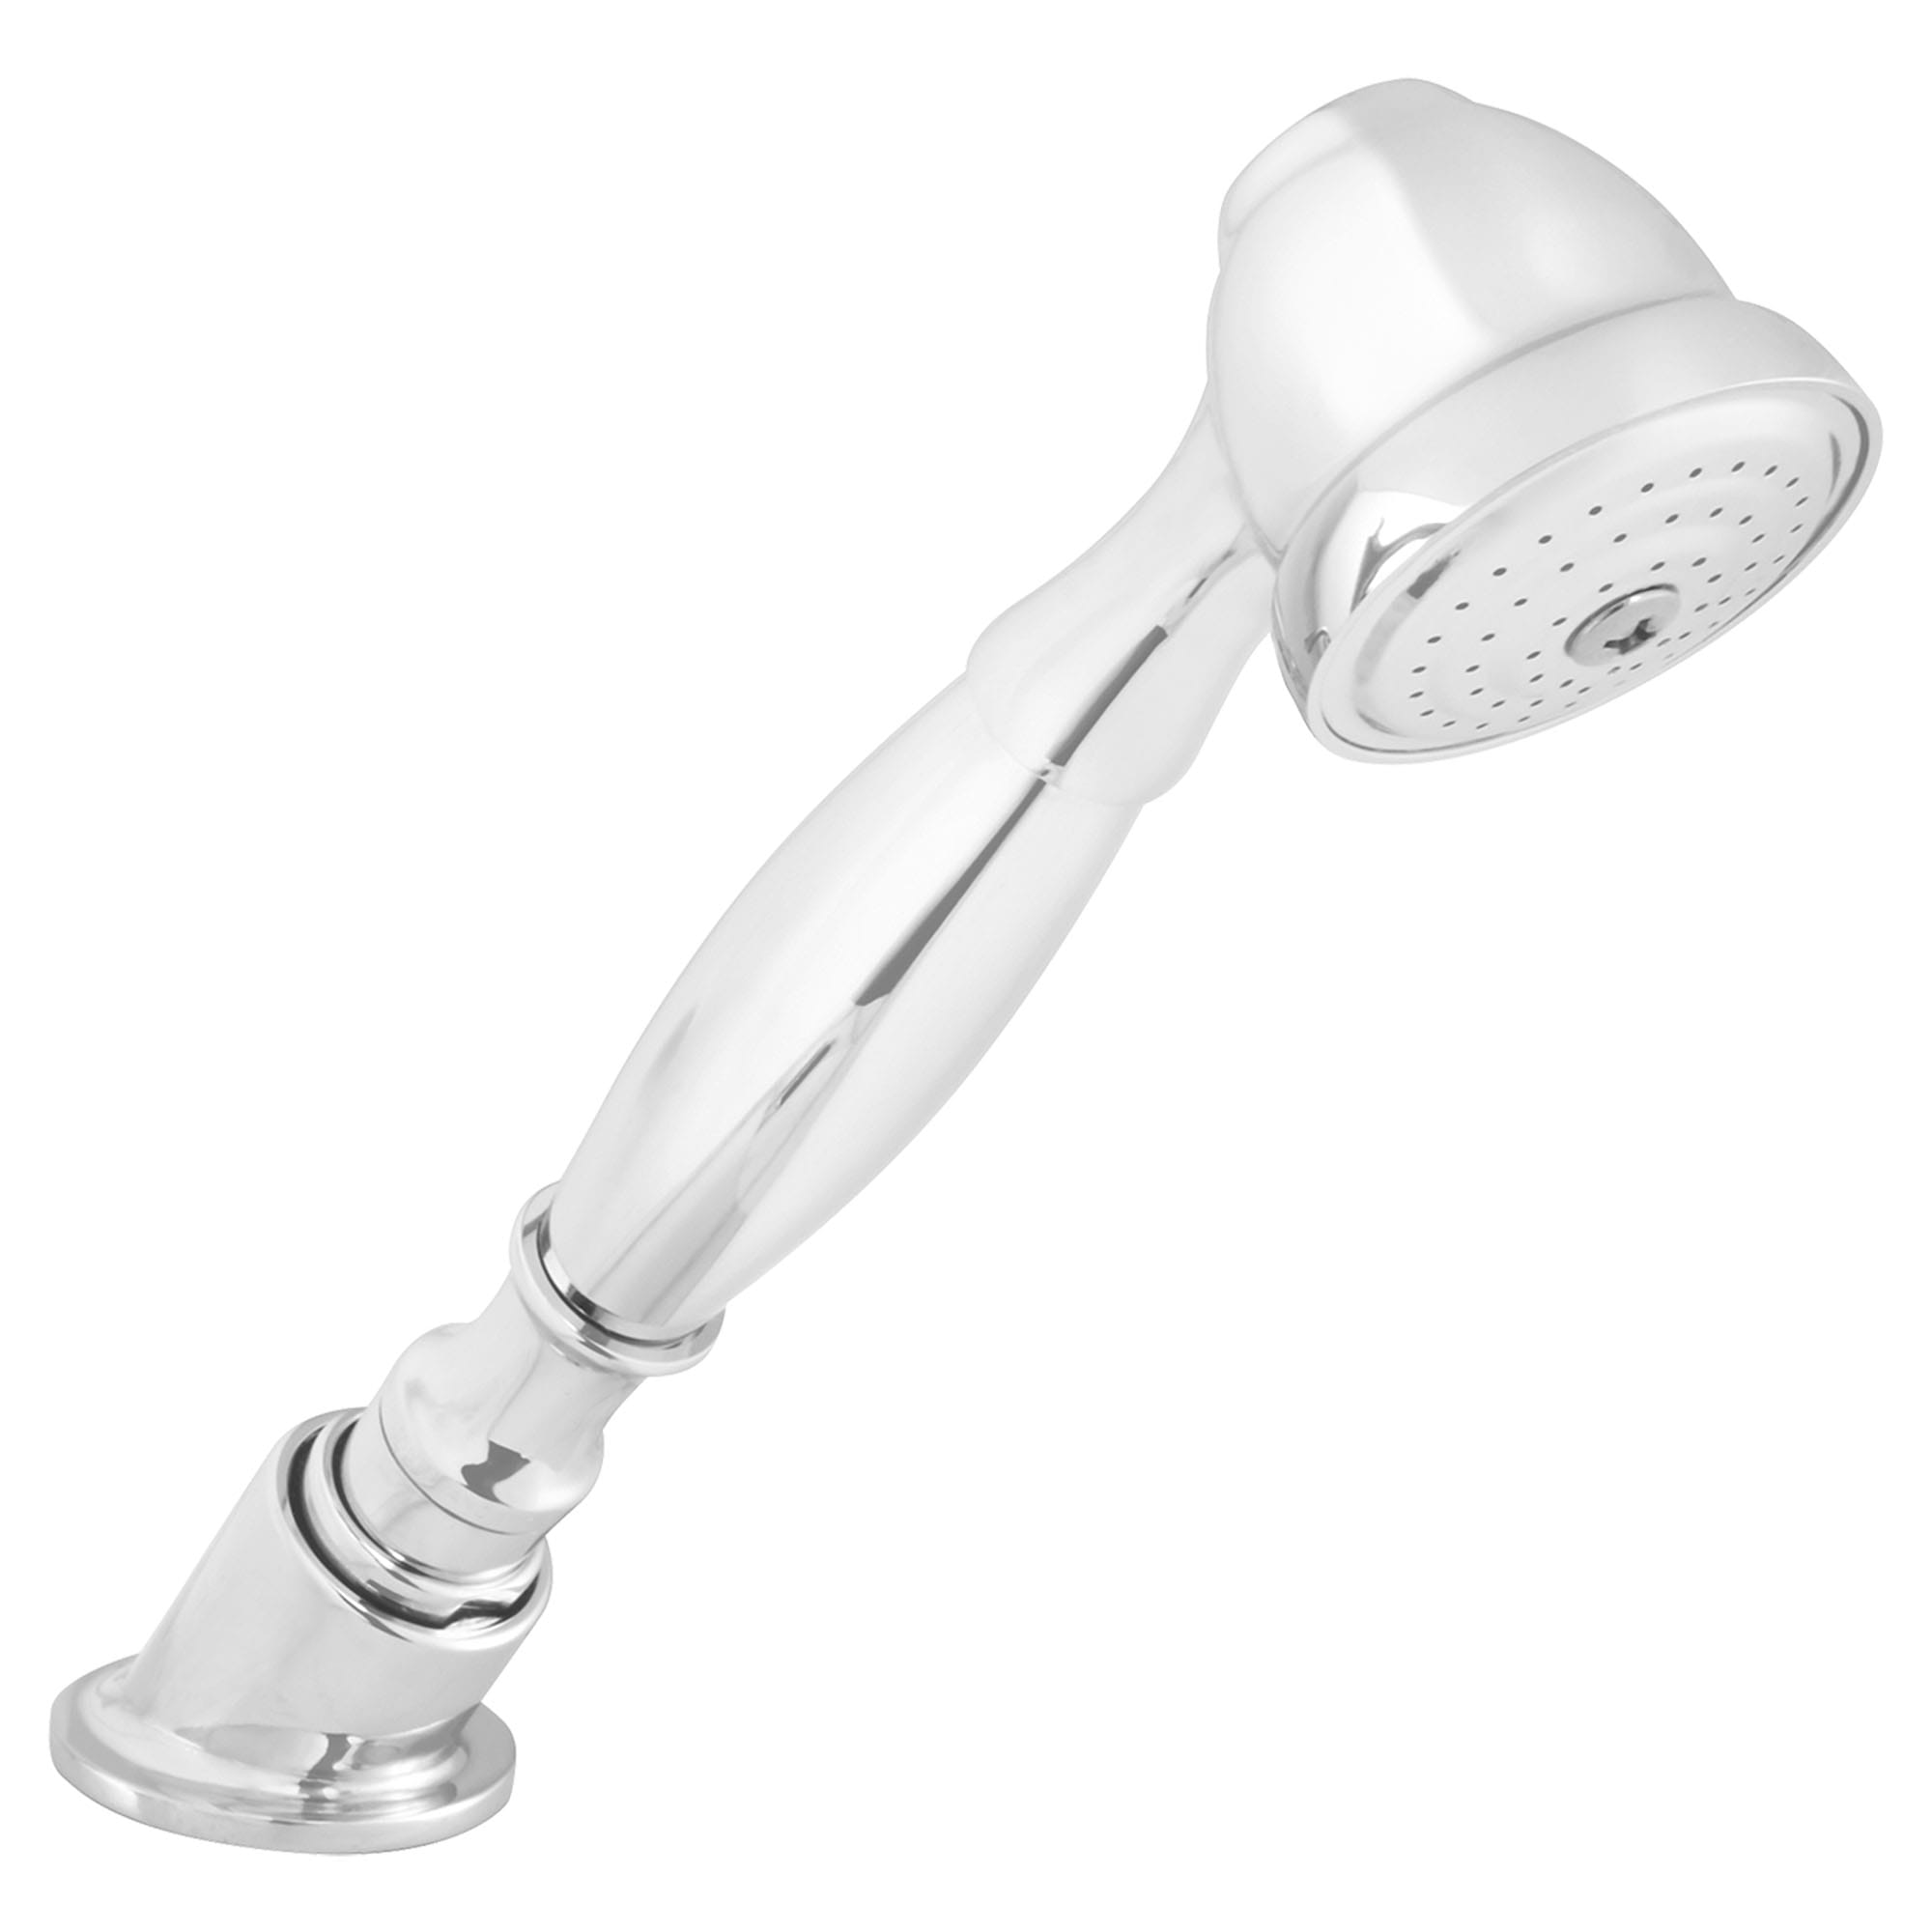 Personal 1.8 gpm/6.8 L/min Single Function Water-Saving Hand Shower